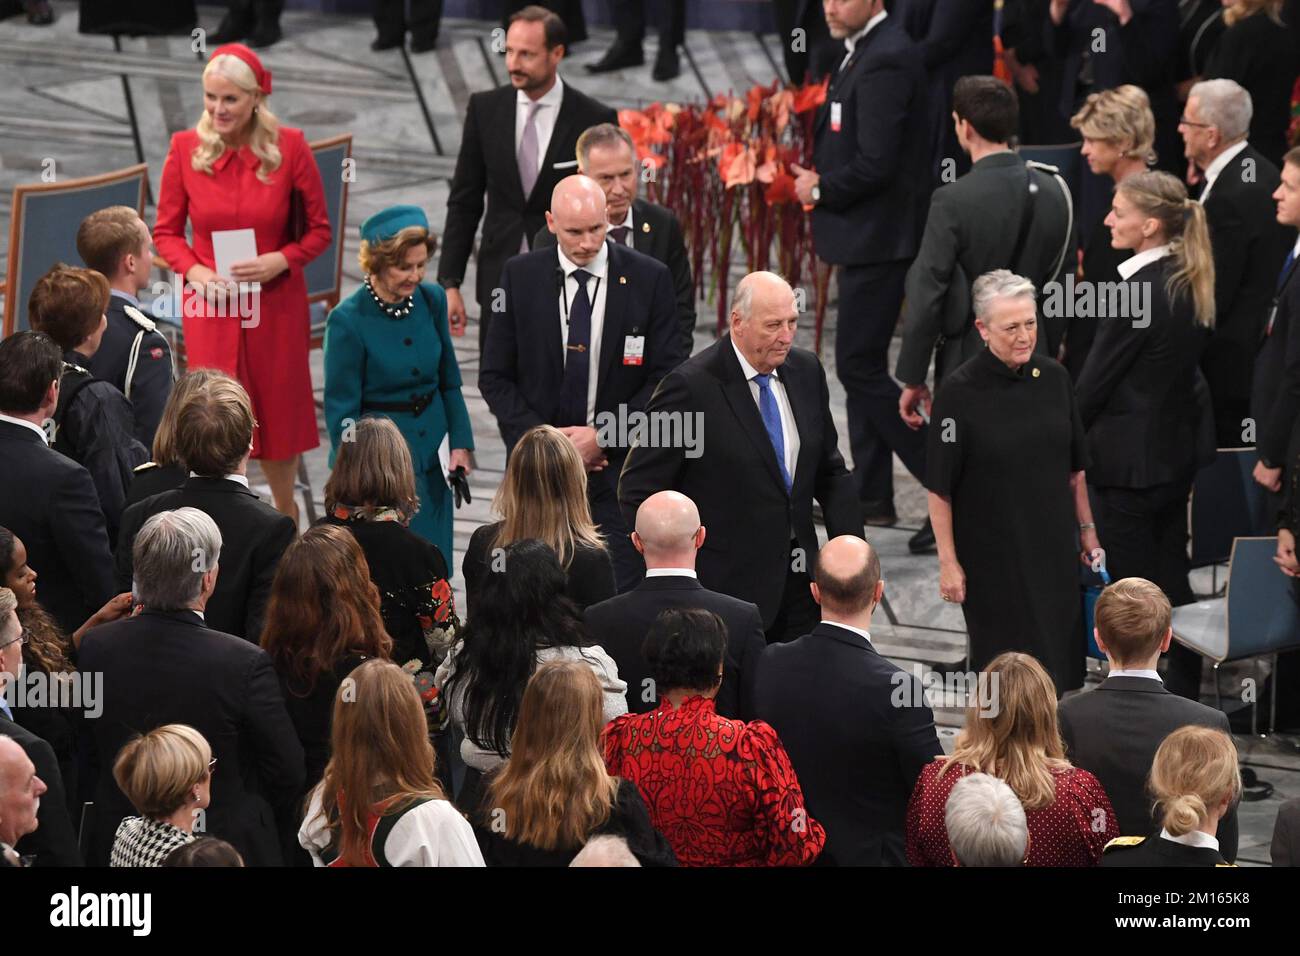 Oslo, Norway. 10th Dec, 2022. Crown Princess Mette-Marit of Norway, Crown Prince Haakon of Norway, Queen Sonja of Norway, King Harald V of Norway and Norwegian Nobel Committee chairwoman Berit Reiss-Andersen attend the 2022 Nobel Peace Prize award ceremony at the City Hall in Oslo, Norway on December 10, 2022. Photo by Paul Treadway/ Credit: UPI/Alamy Live News Stock Photo